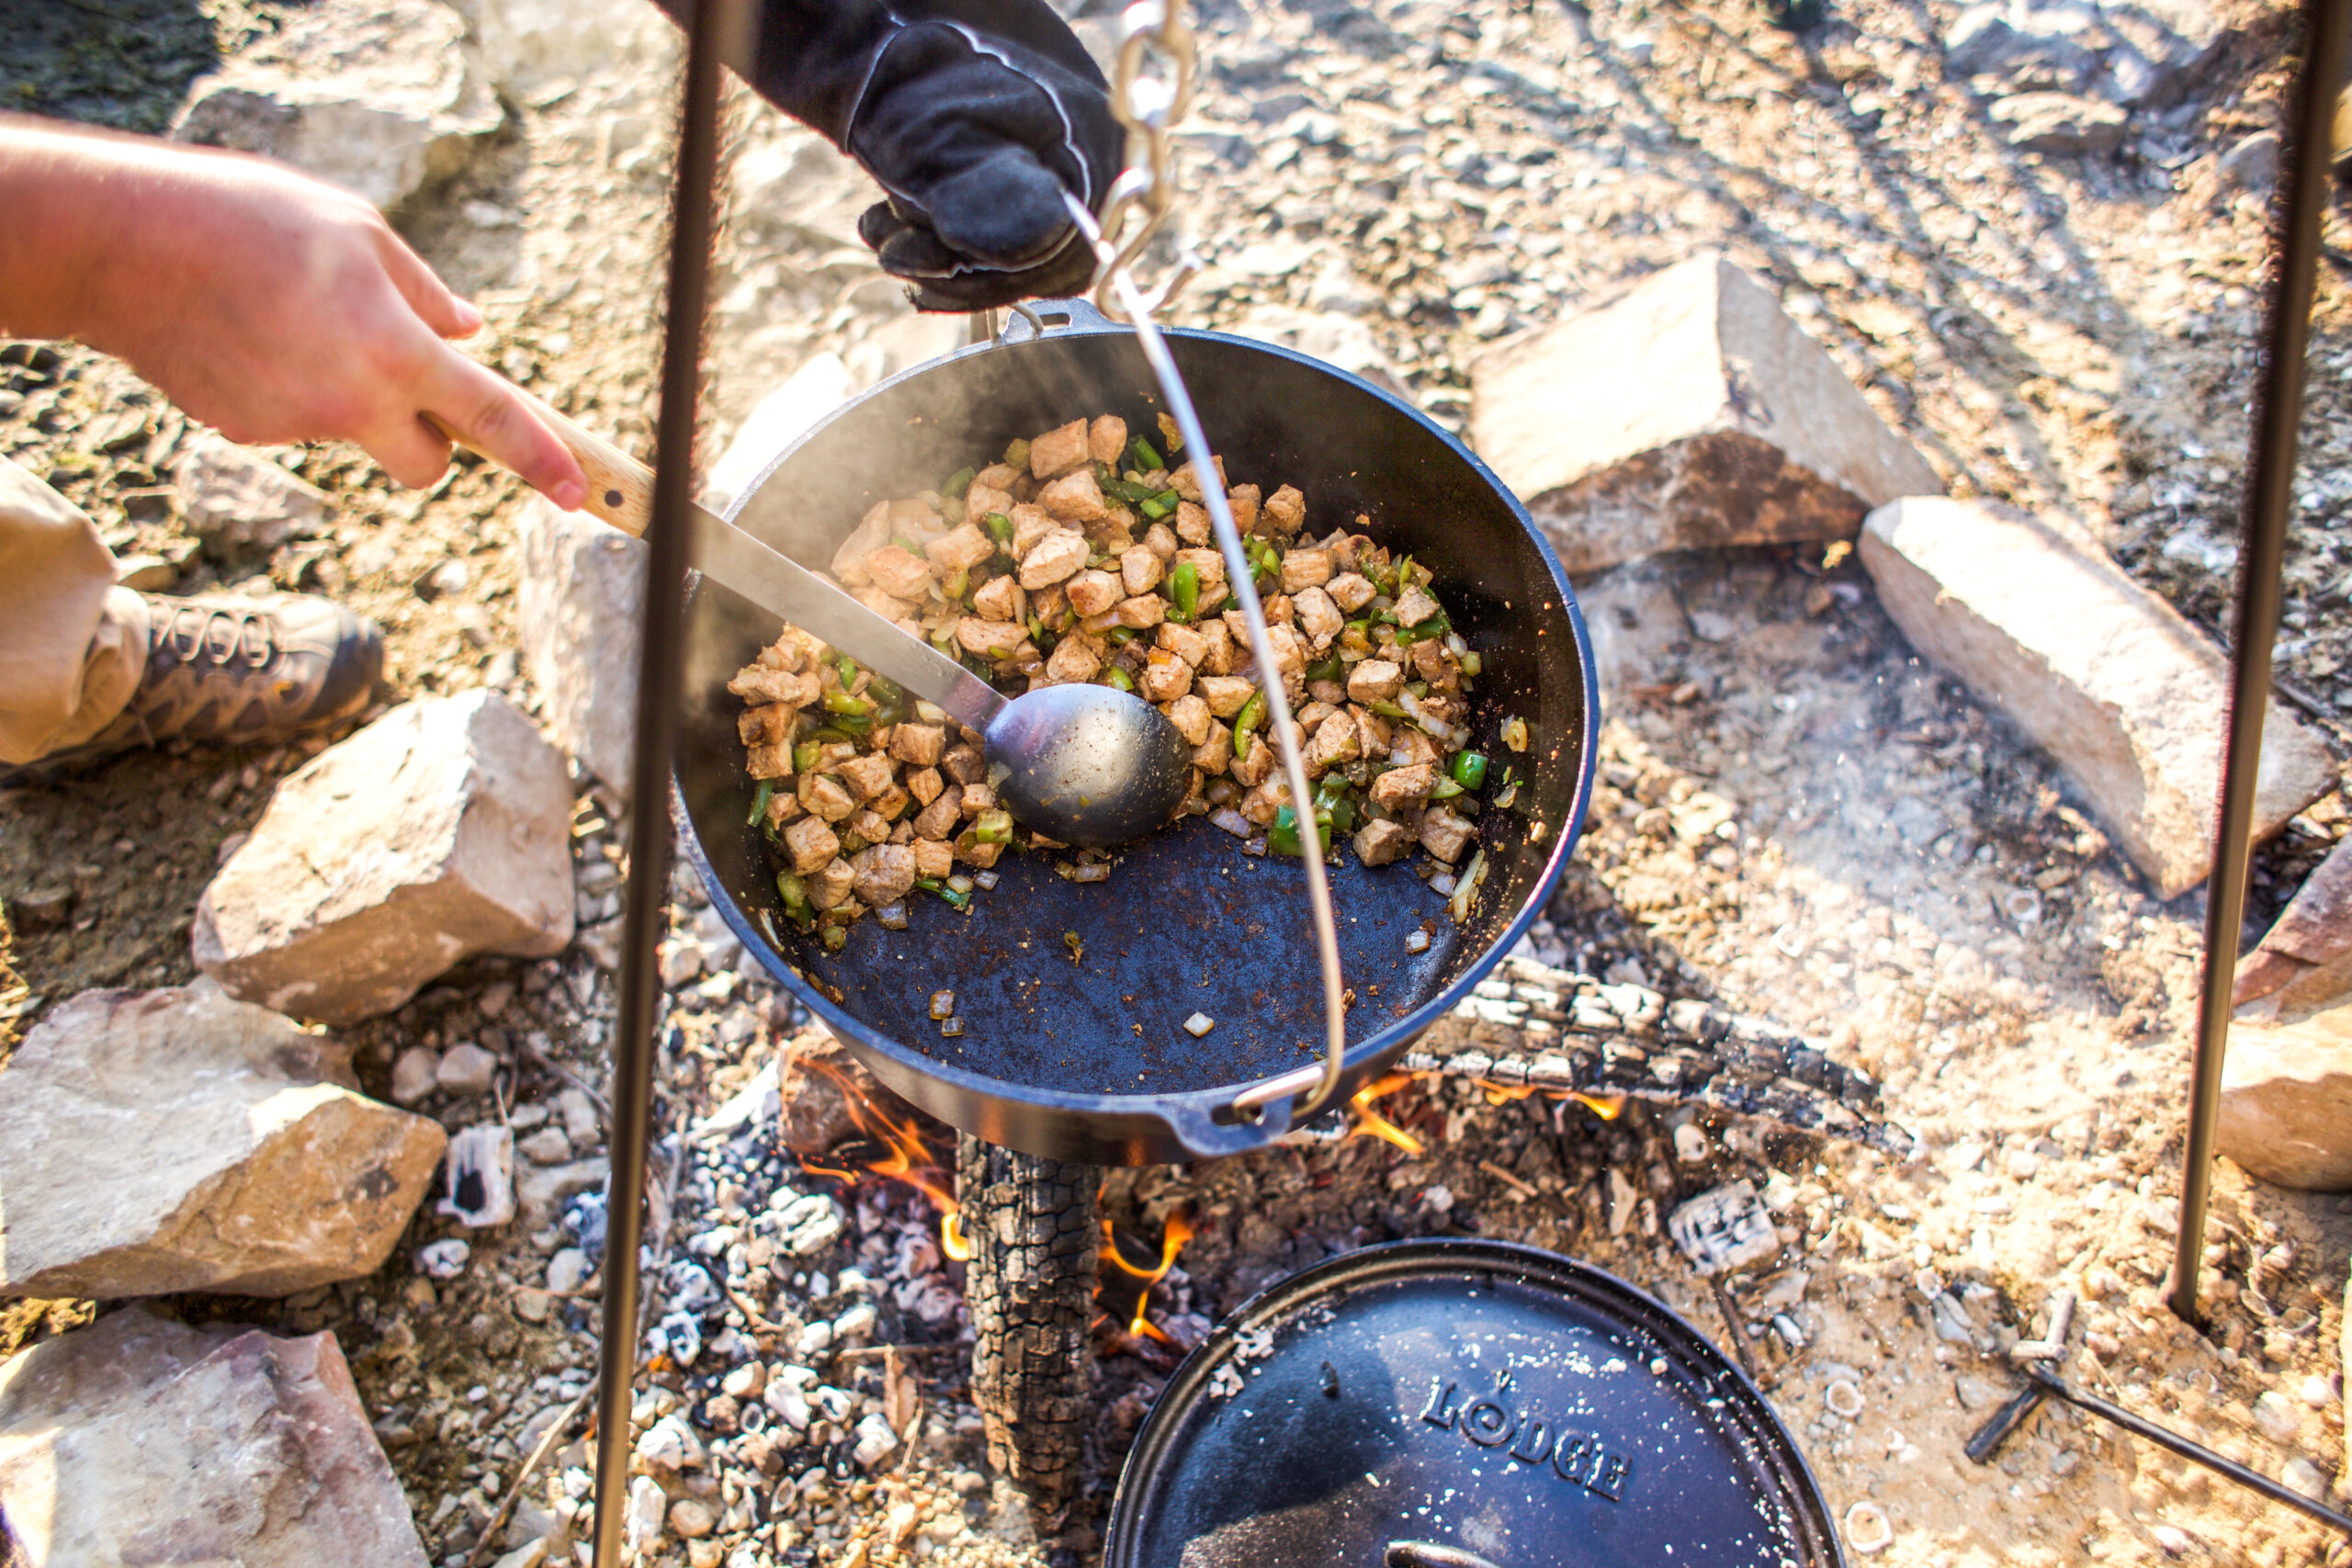 Lodge Cast Iron: Great Camping Gear and Best Fall Recipes - The RV